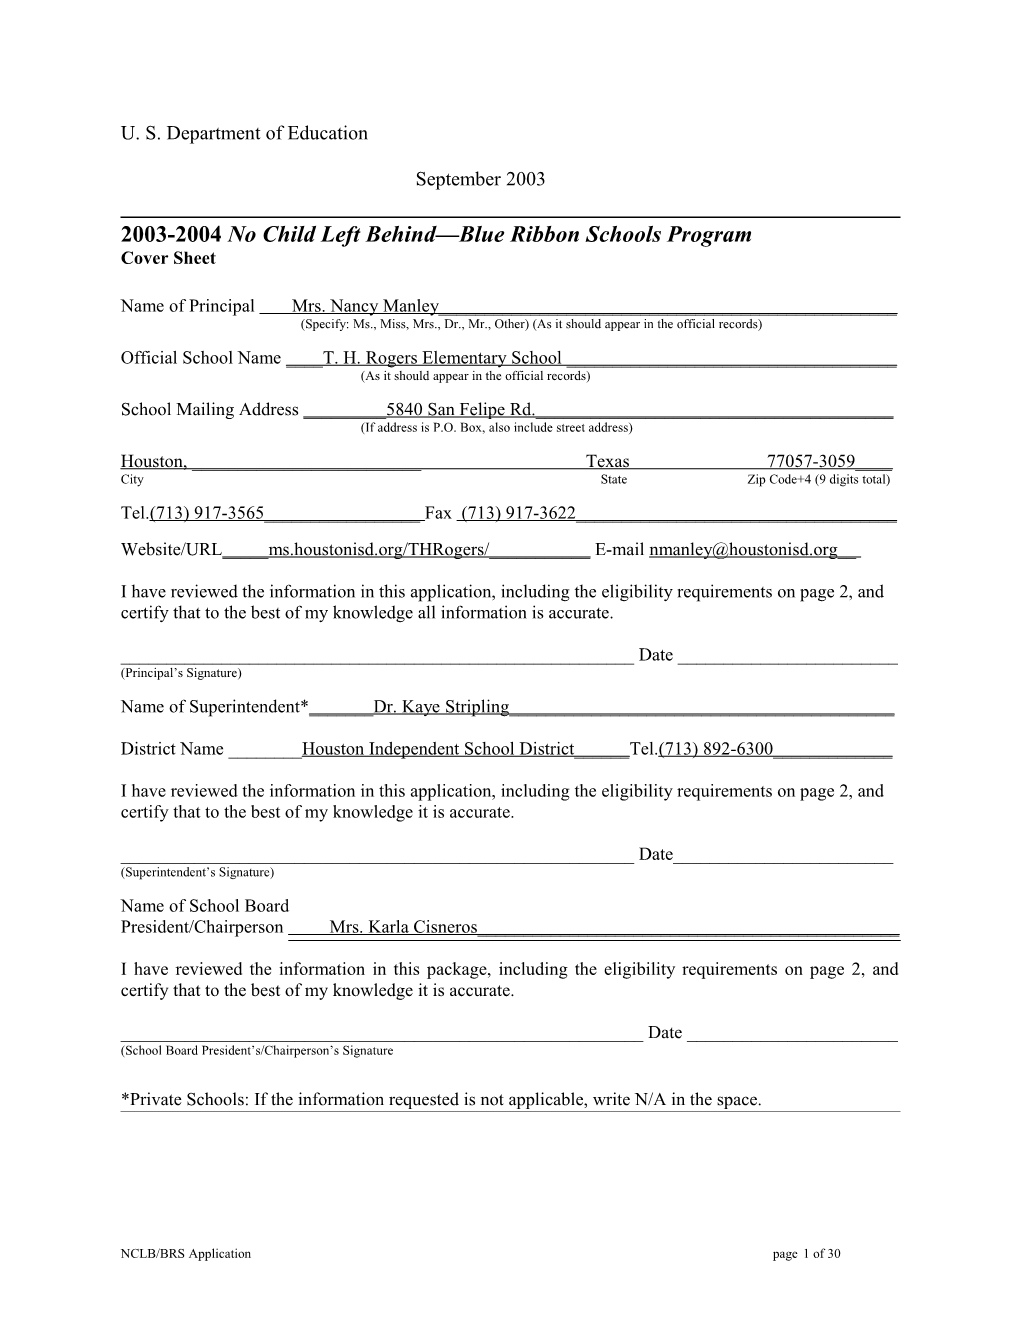 T. H. Rogers Elementary School 2004 No Child Left Behind-Blue Ribbon School Application (Msword)